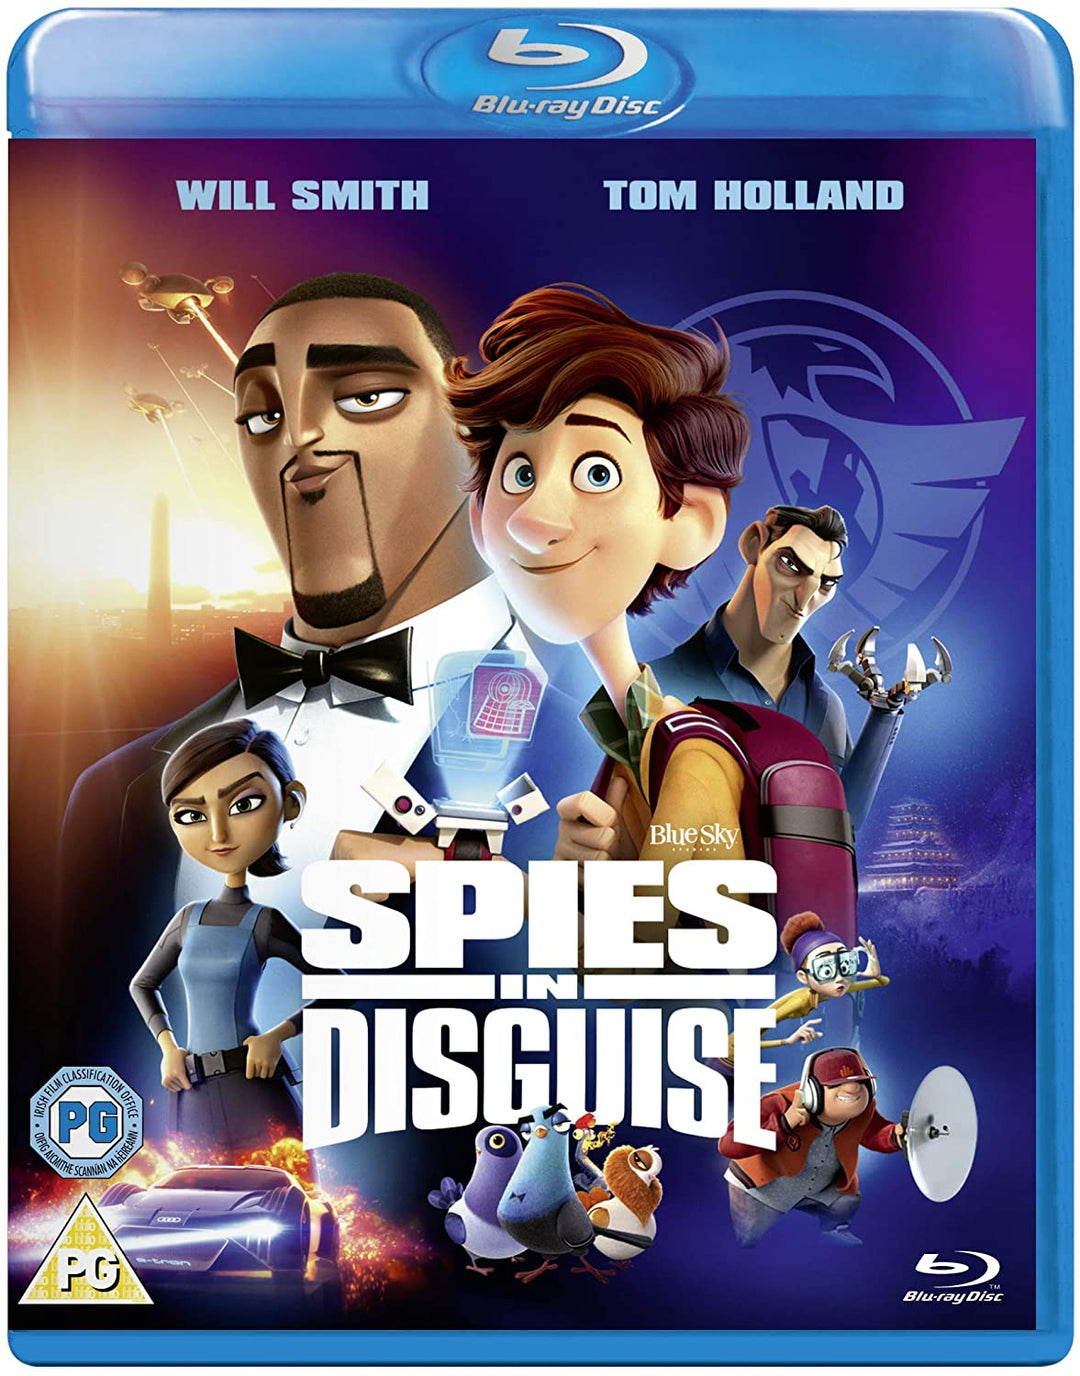 Spies in Disguise - Family/Comedy [Blu-ray]